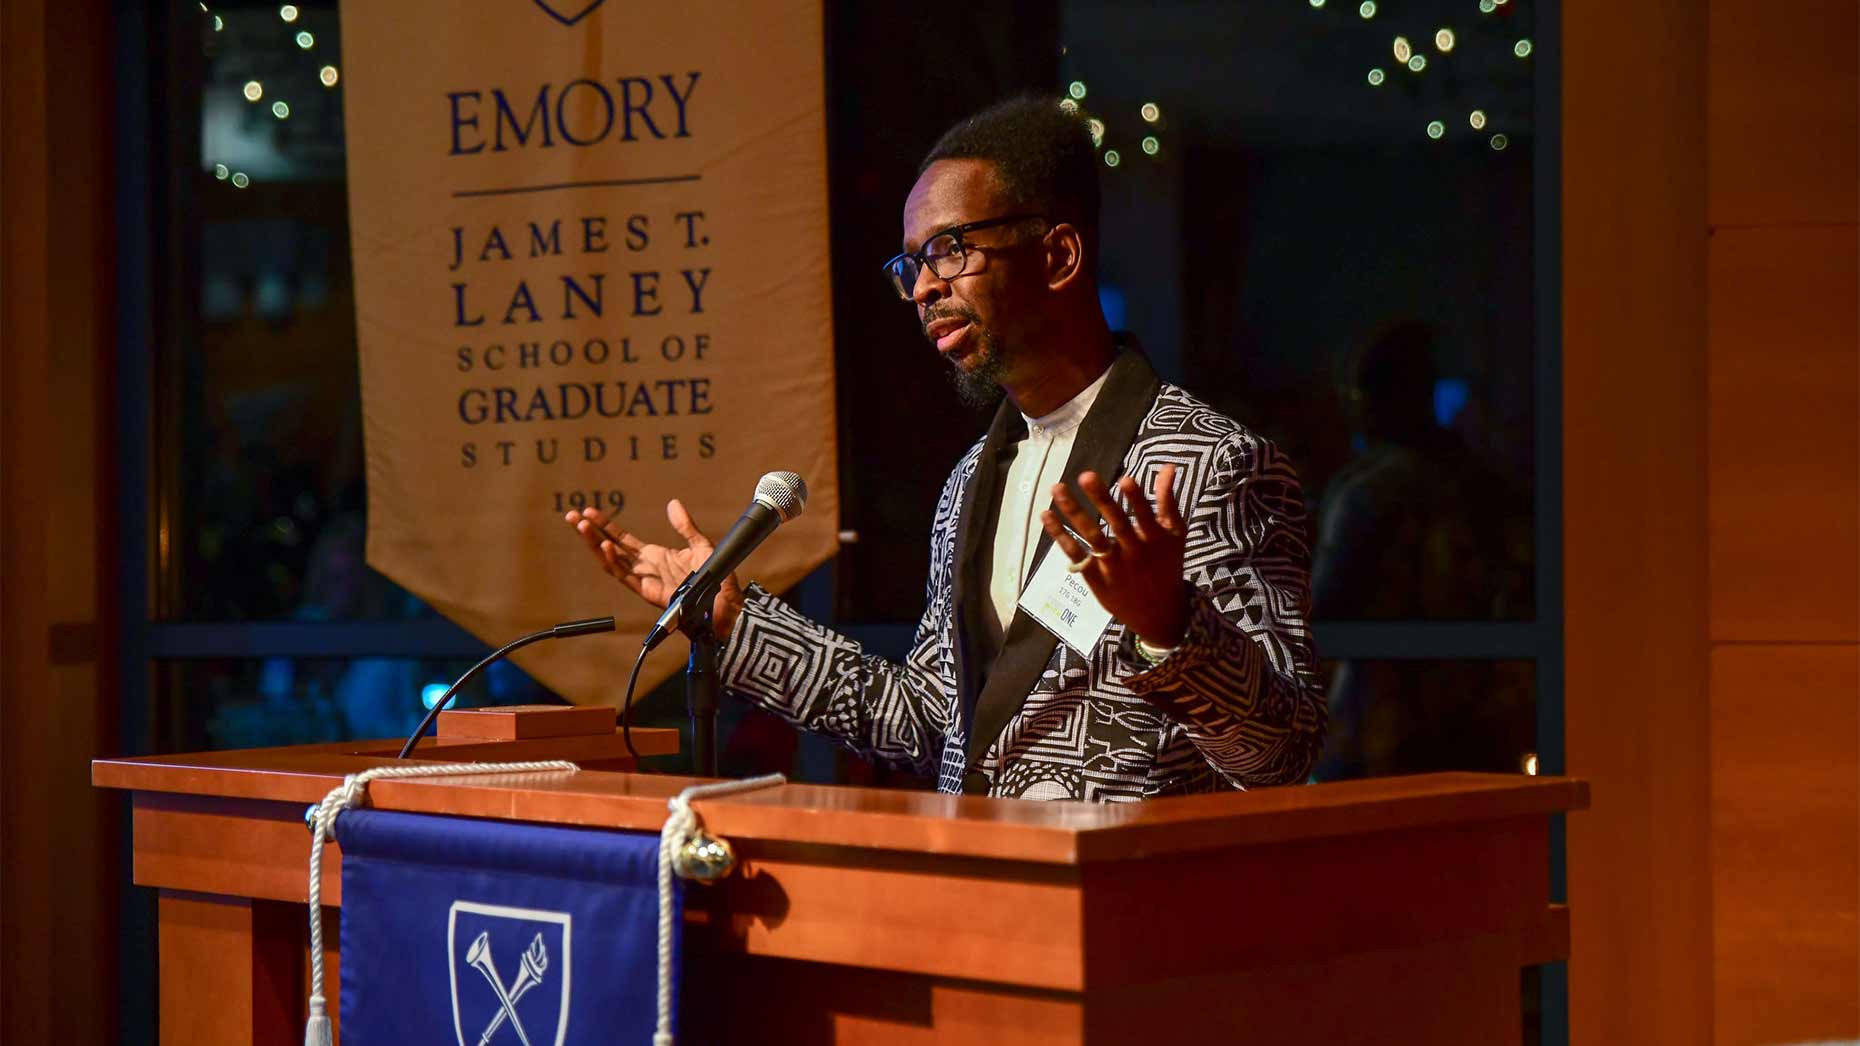 Male speaker gives lecture behind a podium on an Emory University stage.